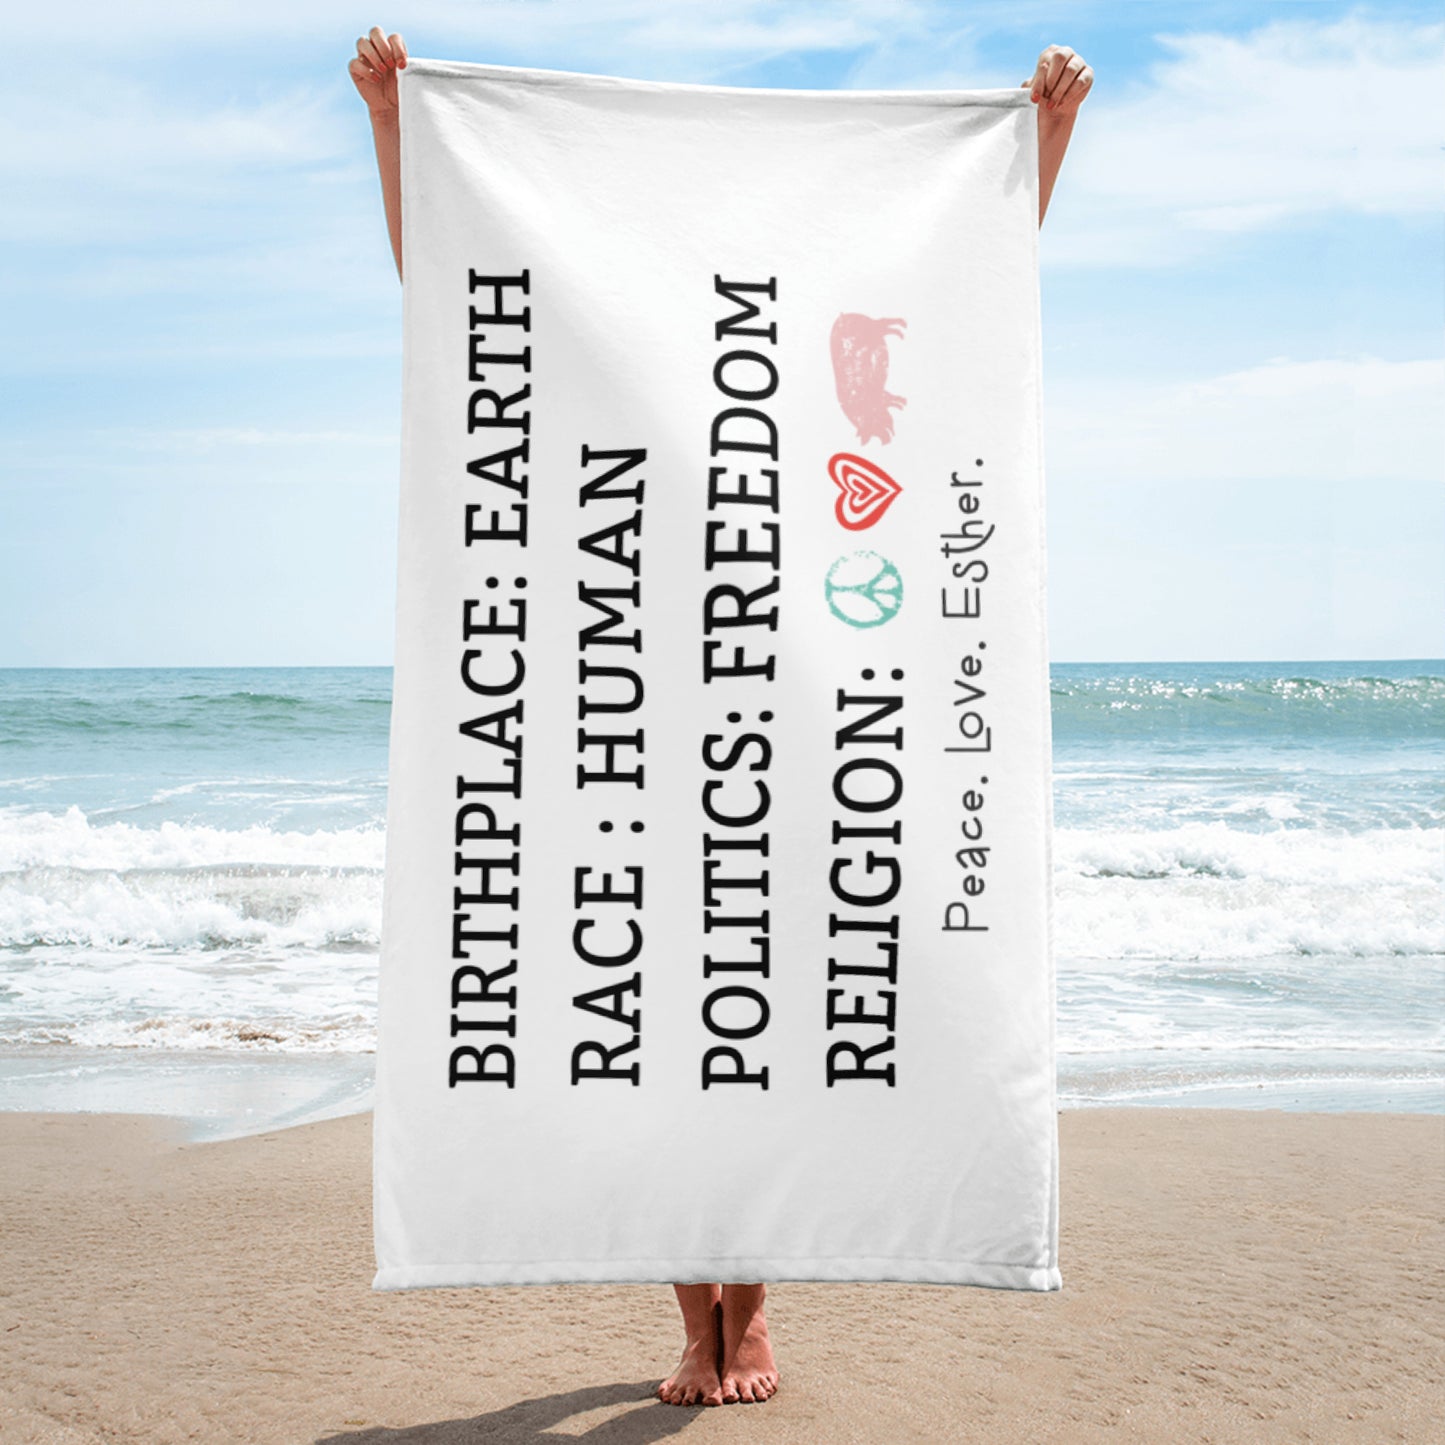 NEW - Religion= Peace Love Esther -Towel